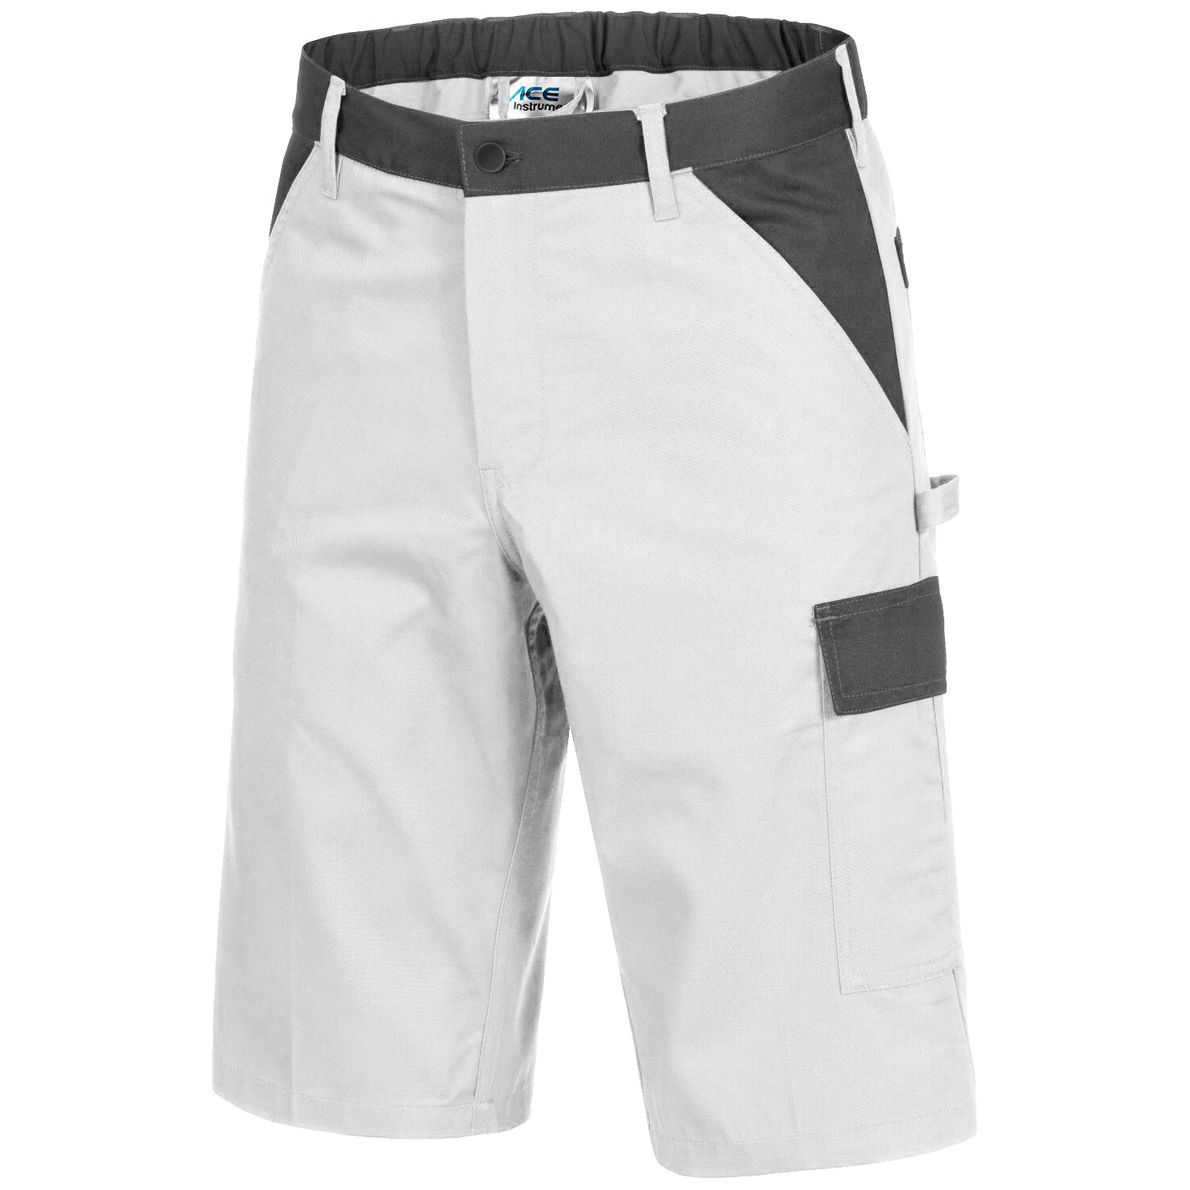 ACE Handyman Painter Work Trousers - Cargo Shorts for Work - White - 60